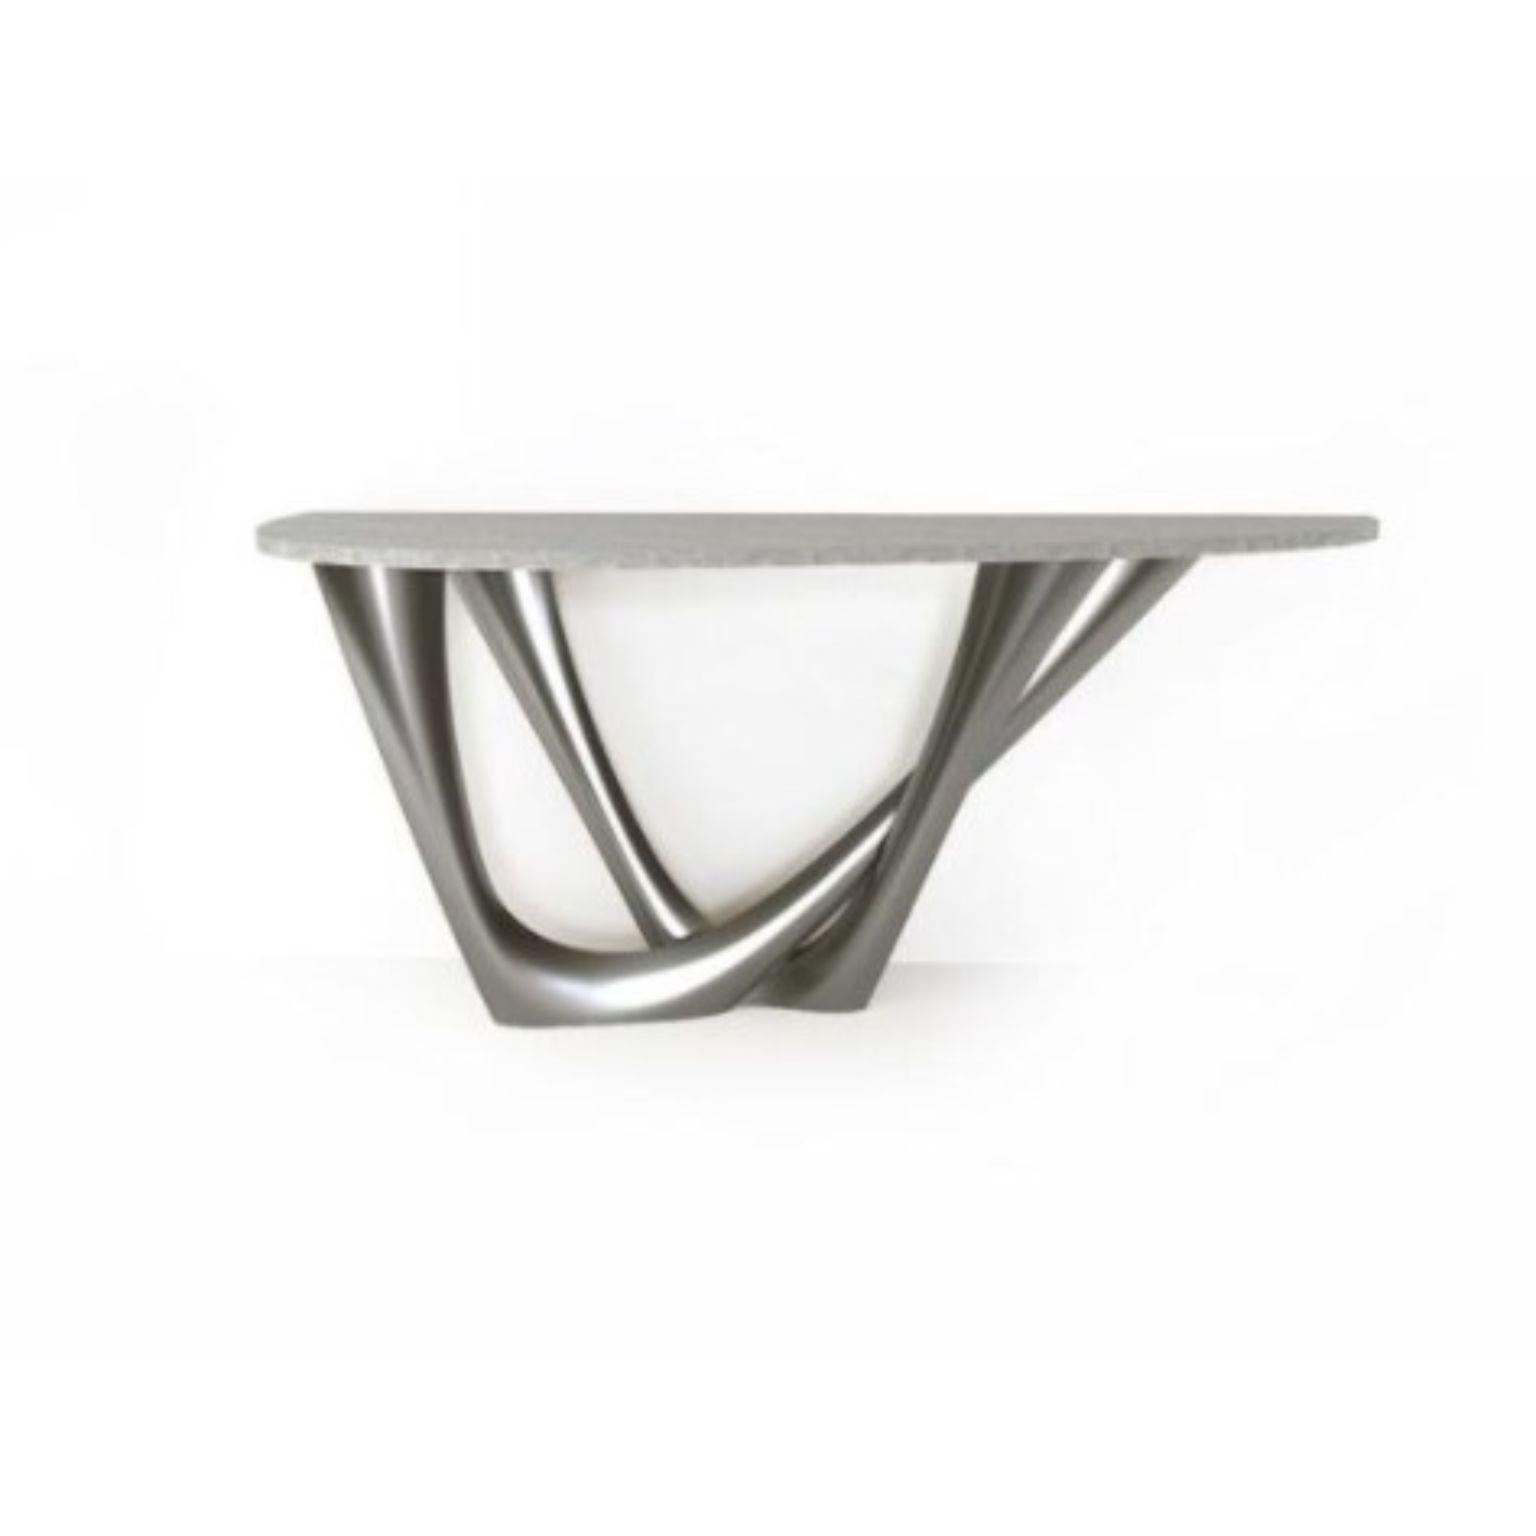 Organic Modern Beige Grey G-Console Duo Concrete Top and Steel Base by Zieta For Sale